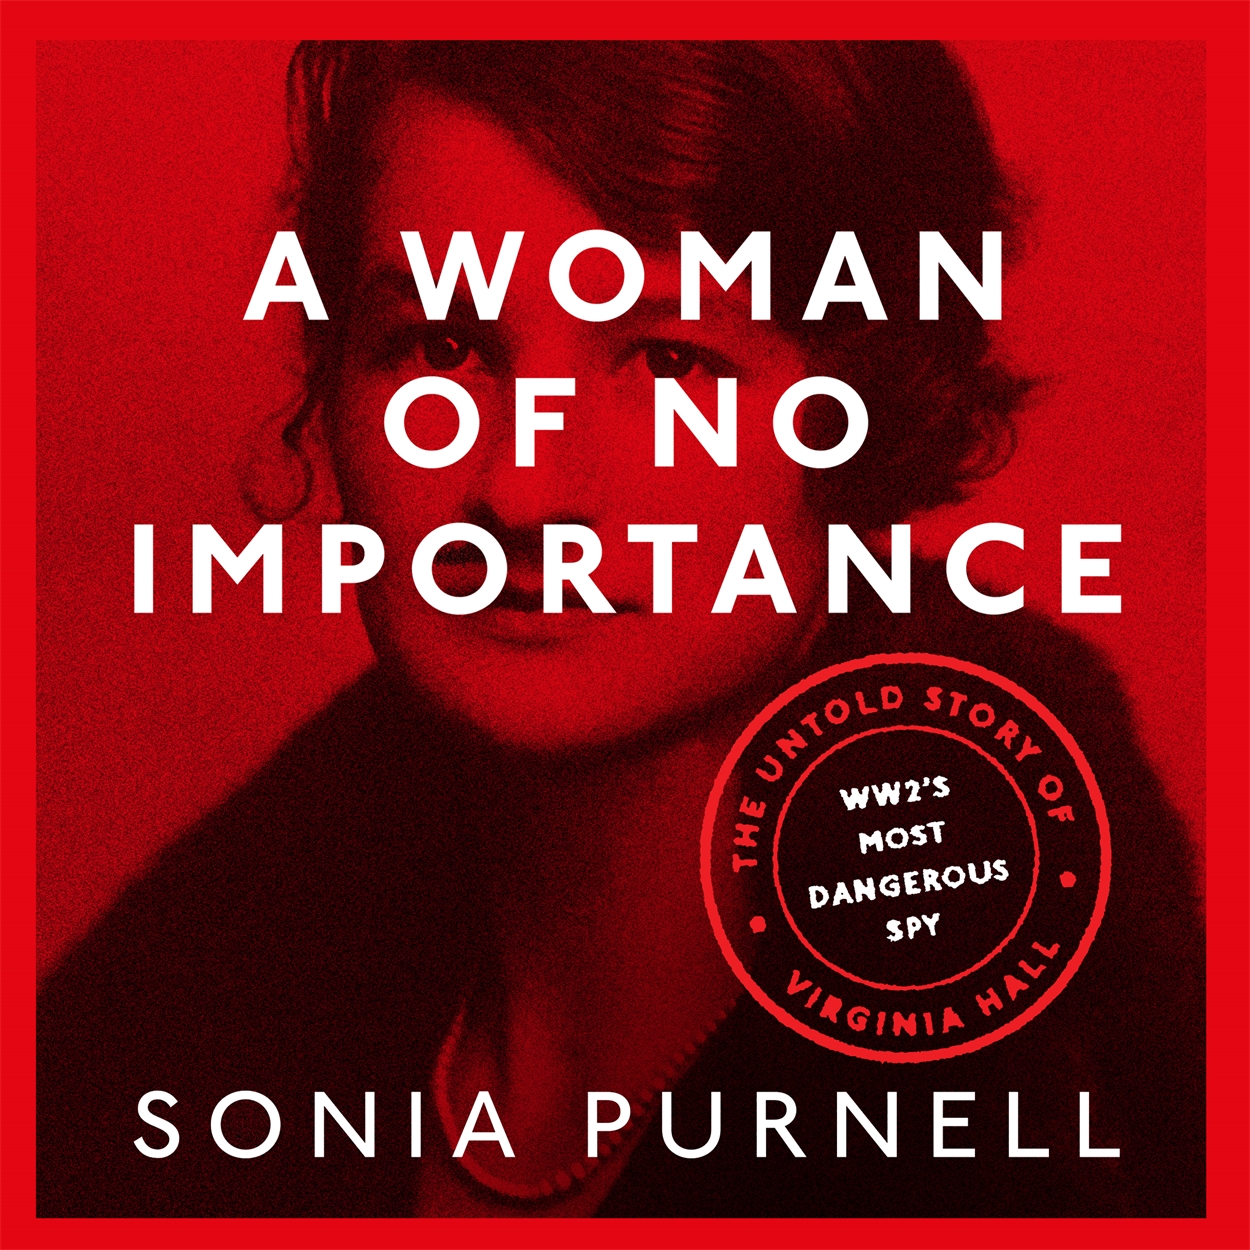 sonia purnell a woman of no importance review